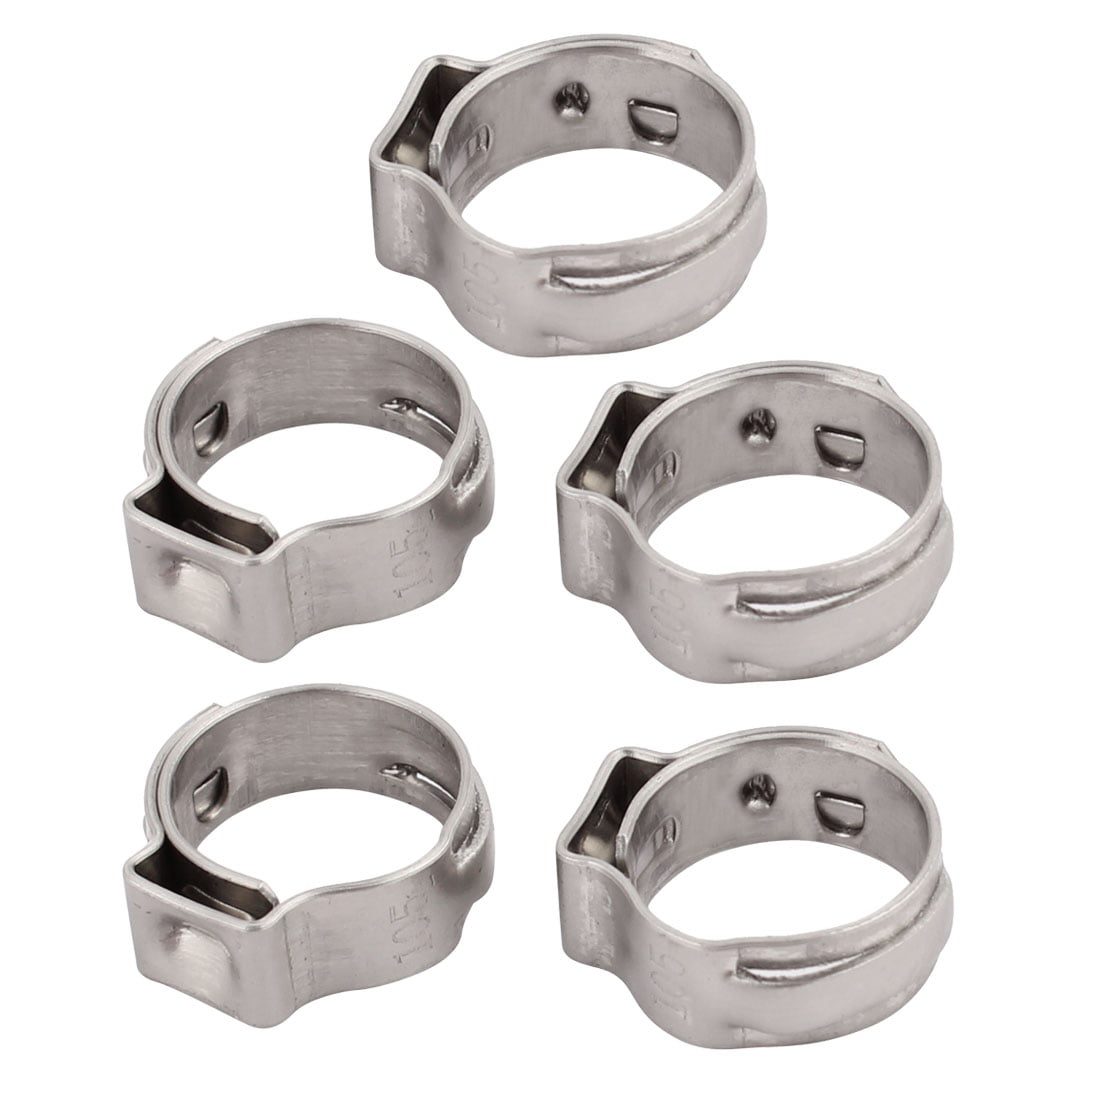 8.8mm-10.5mm 304 Stainless Steel Adjustable Tube Hose Clamps Silver ...